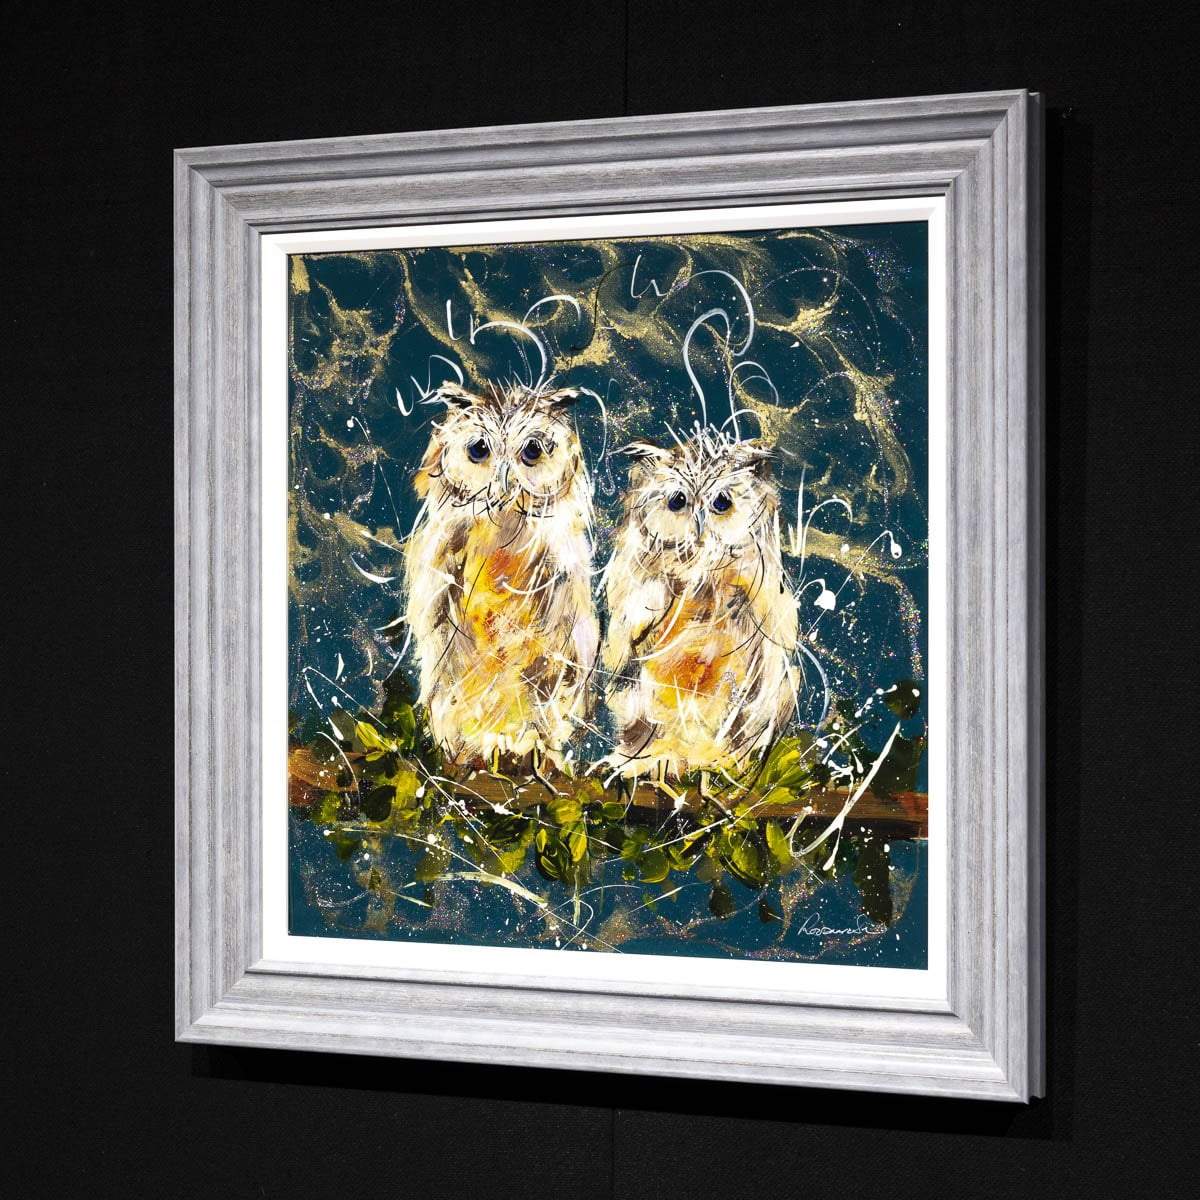 Owl Be There For You - Original Rozanne Bell Framed Original